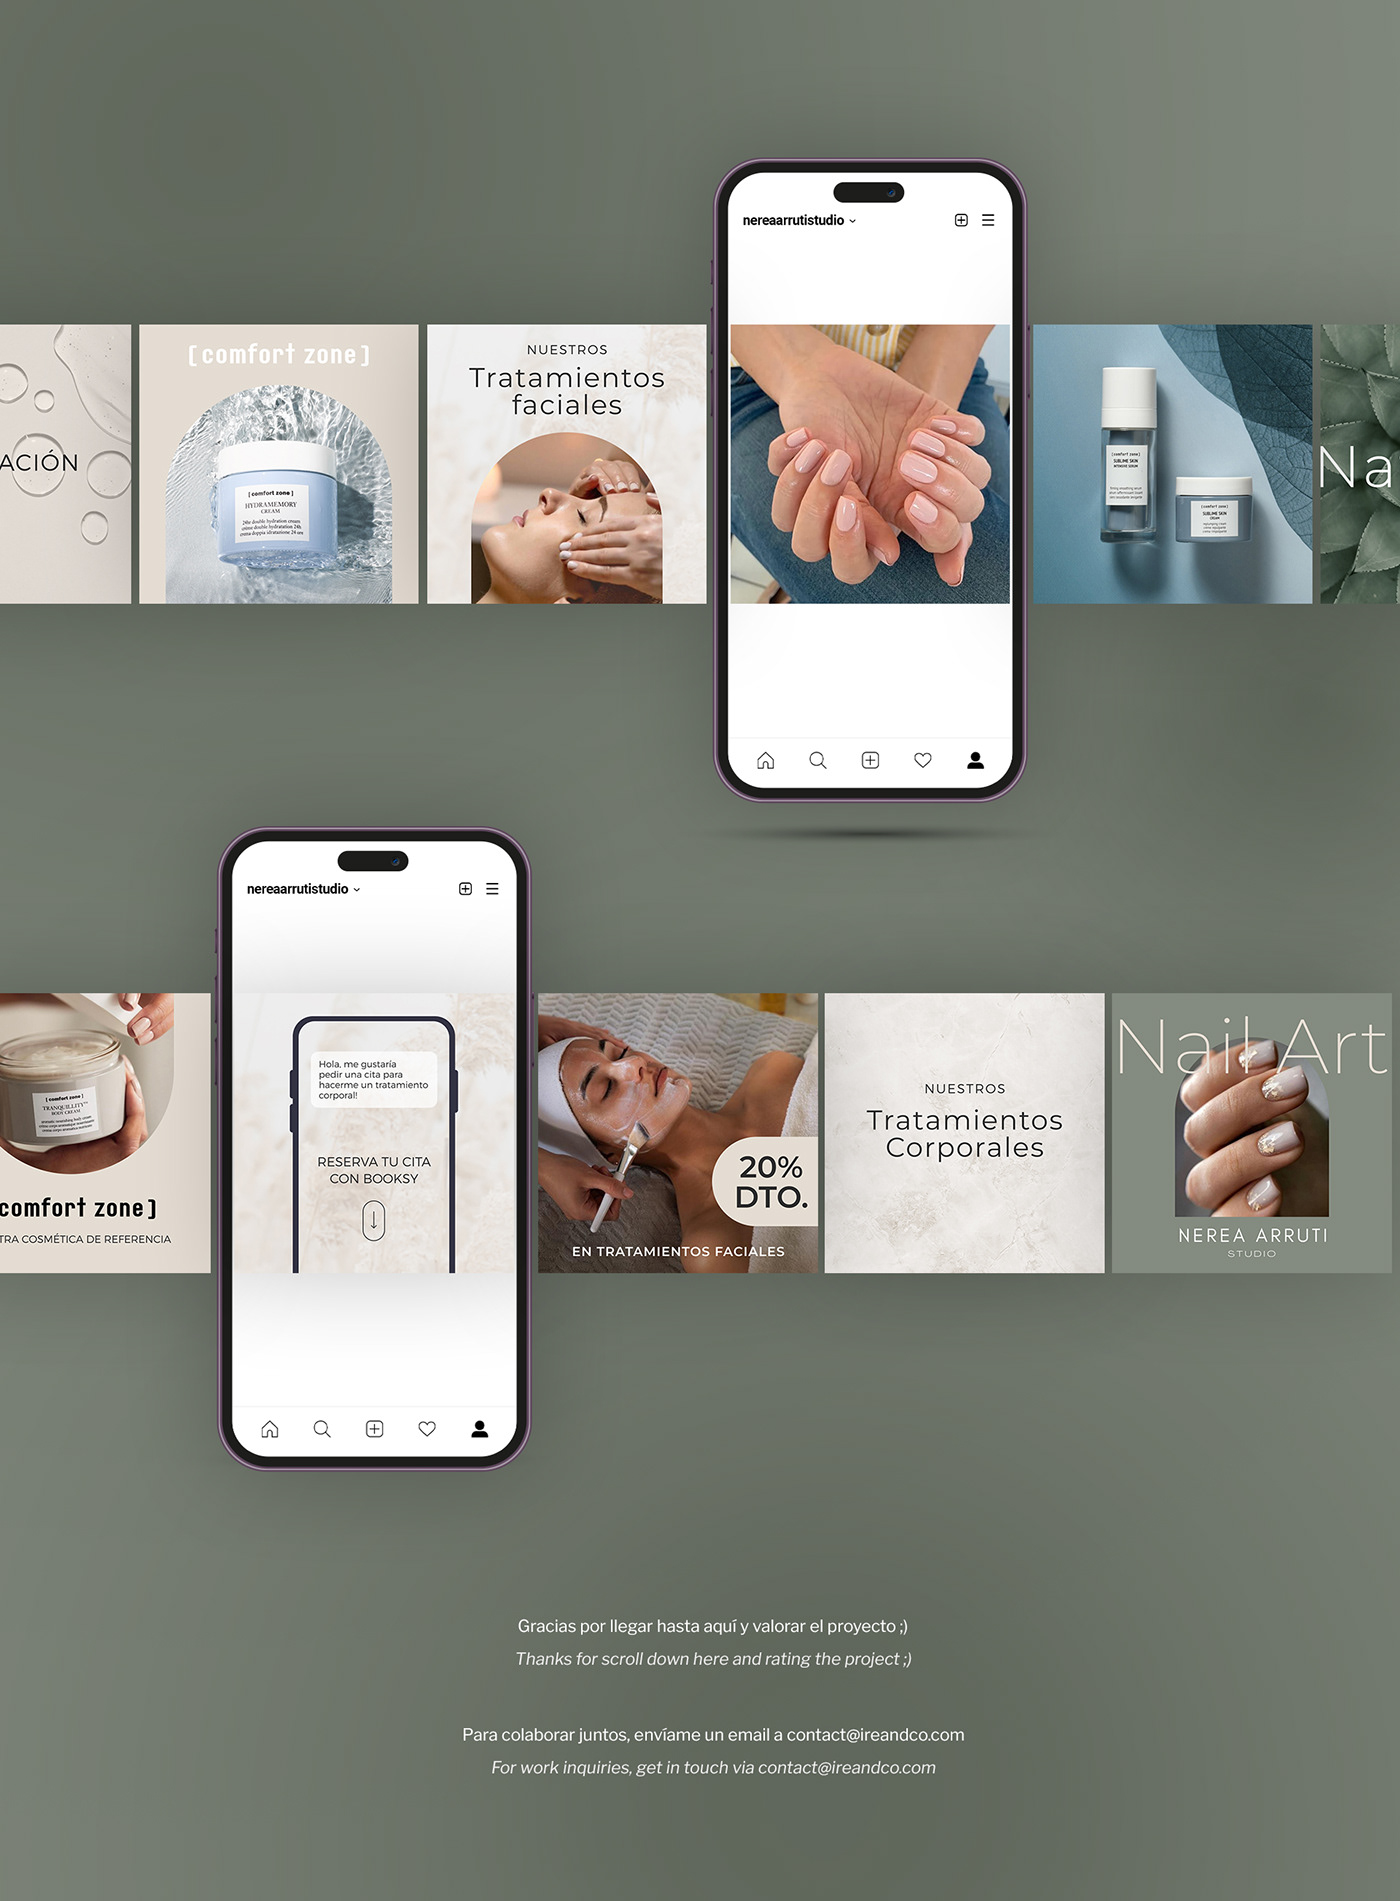 beauty beauty salon entrepreneur UX UI user experience resposive gift card instagram feed User Insterface Web desisign